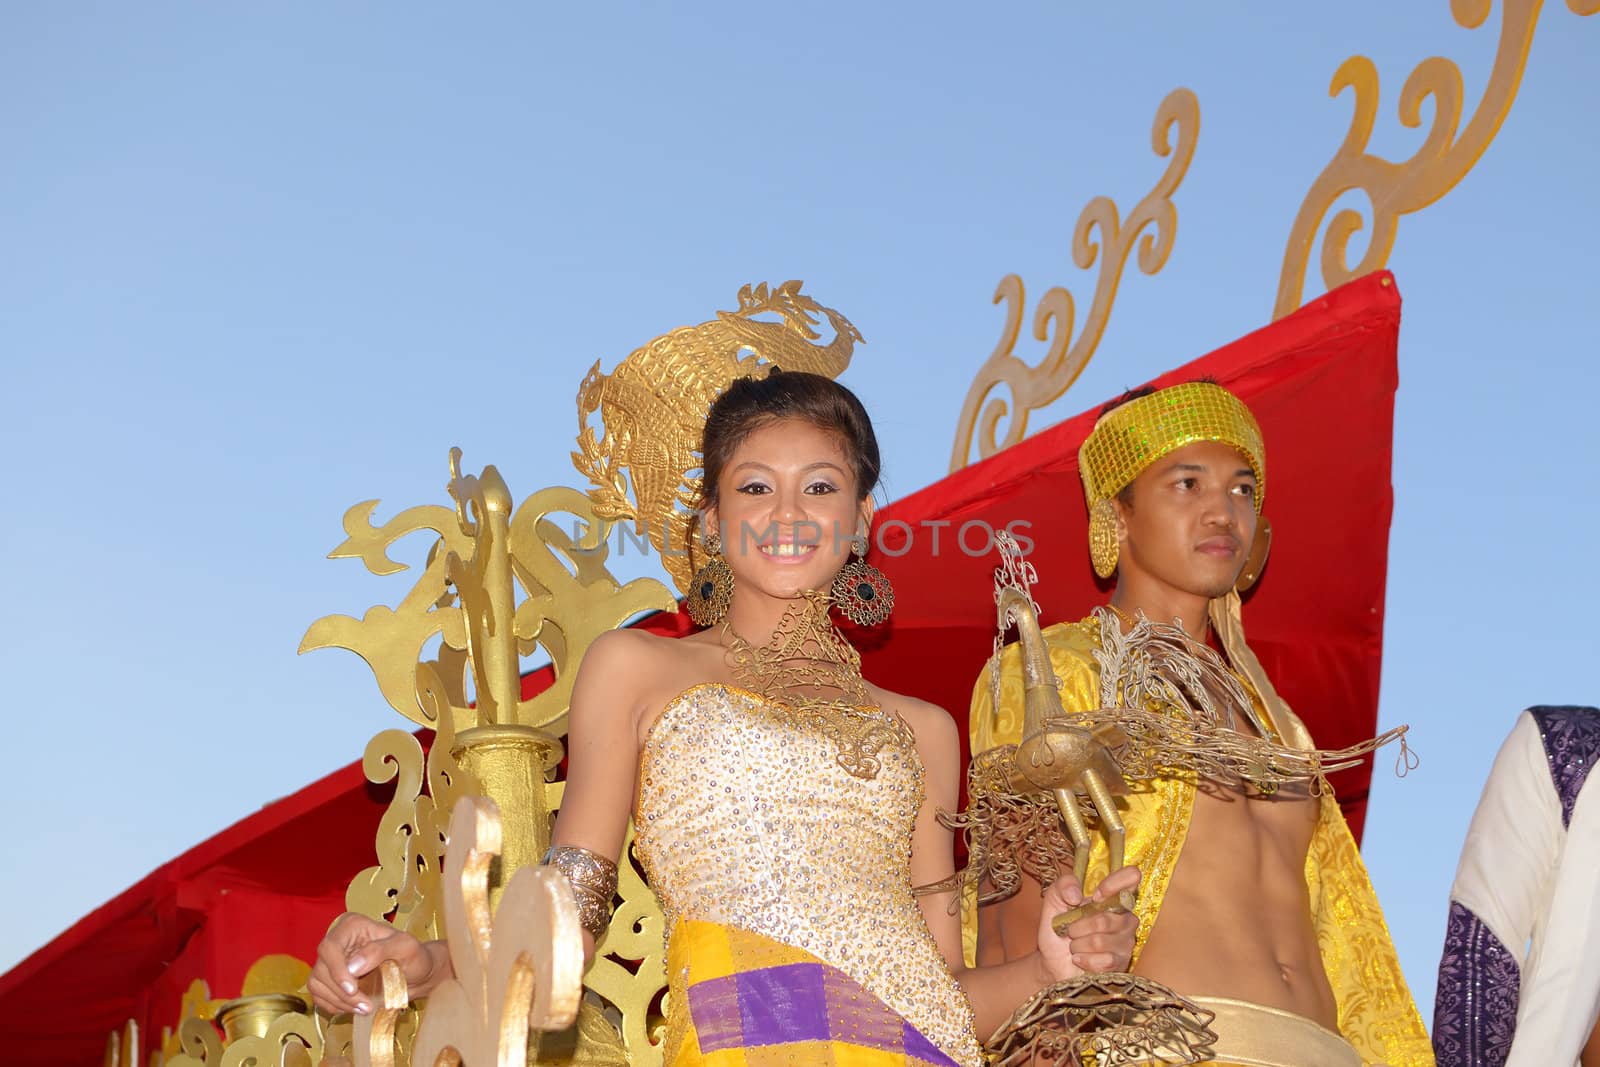 MANILA, PHILIPPINES - APR. 14: pageant contestant in her cultural dress pauses during Aliwan Fiesta, which is the biggest annual national festival competition on April 14, 2012 in Manila Philippines.
